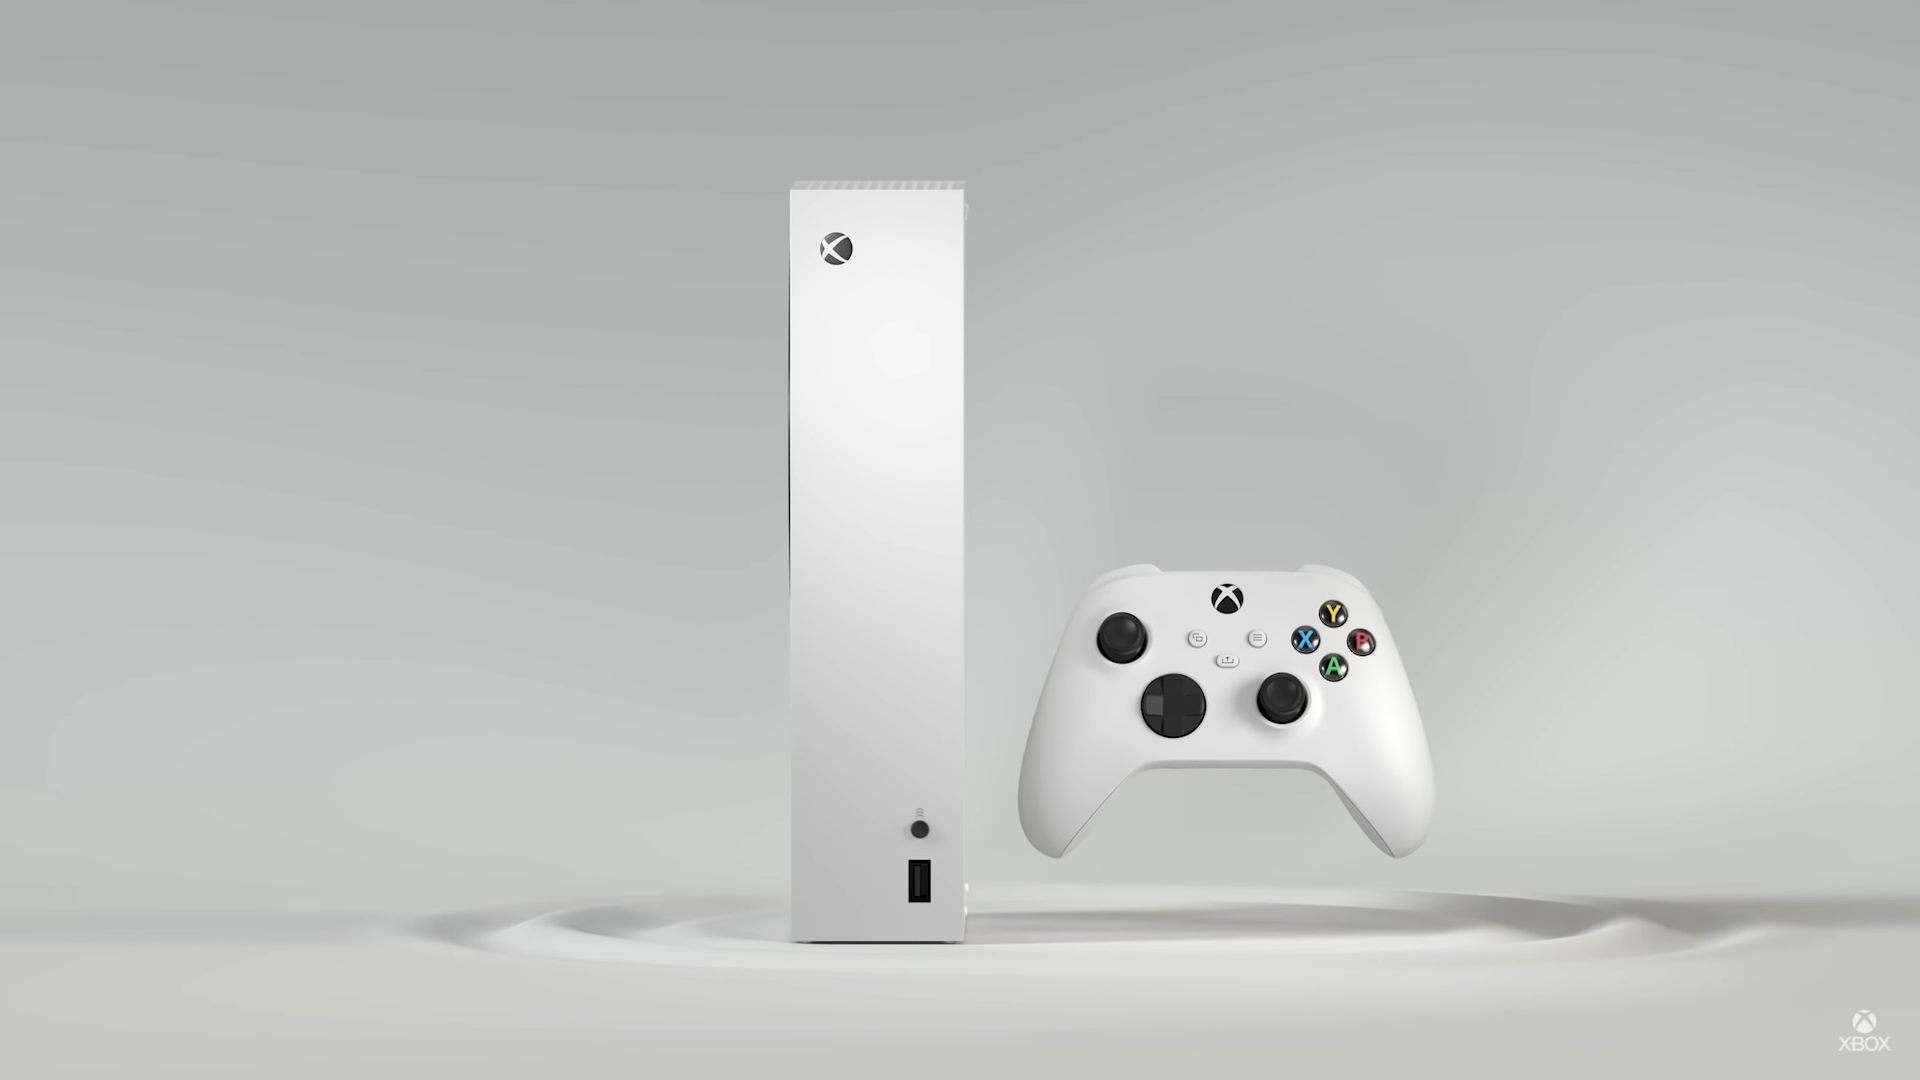 The Xbox Series S one of the best inventions of 2020 according to Time magazine